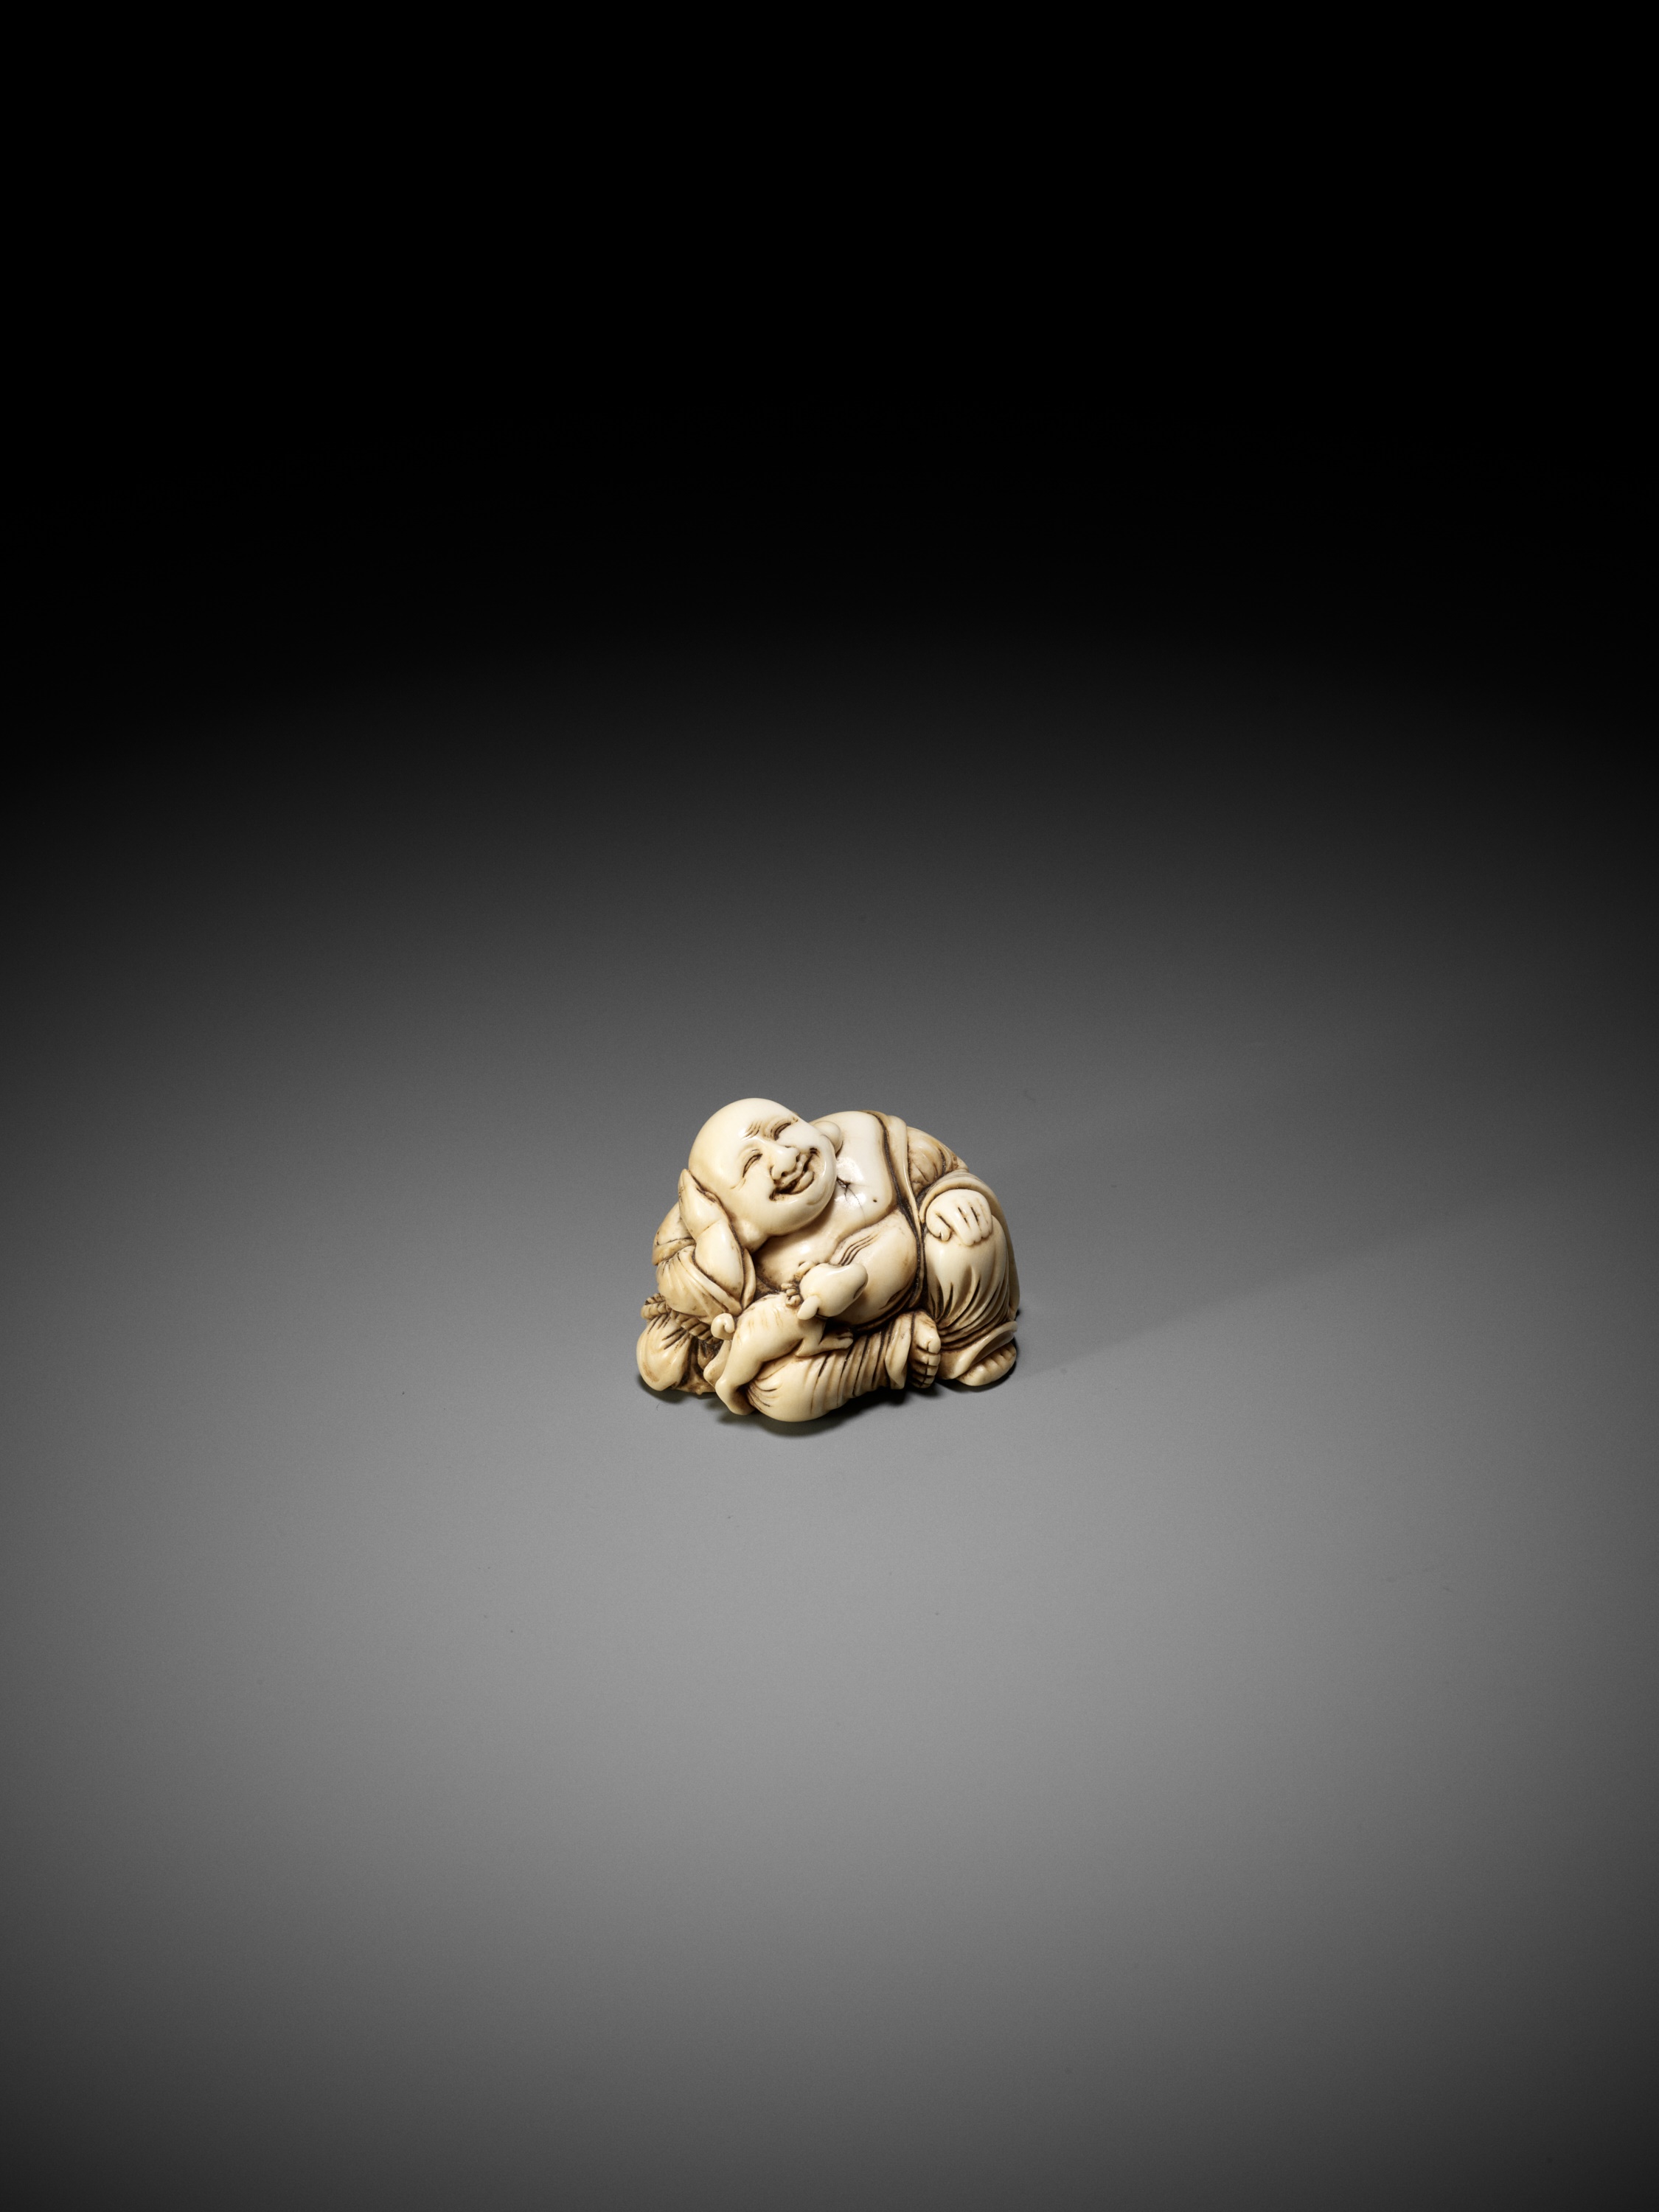 A CHARMING IVORY NETSUKE OF HOTEI WITH PUPPY - Image 9 of 12